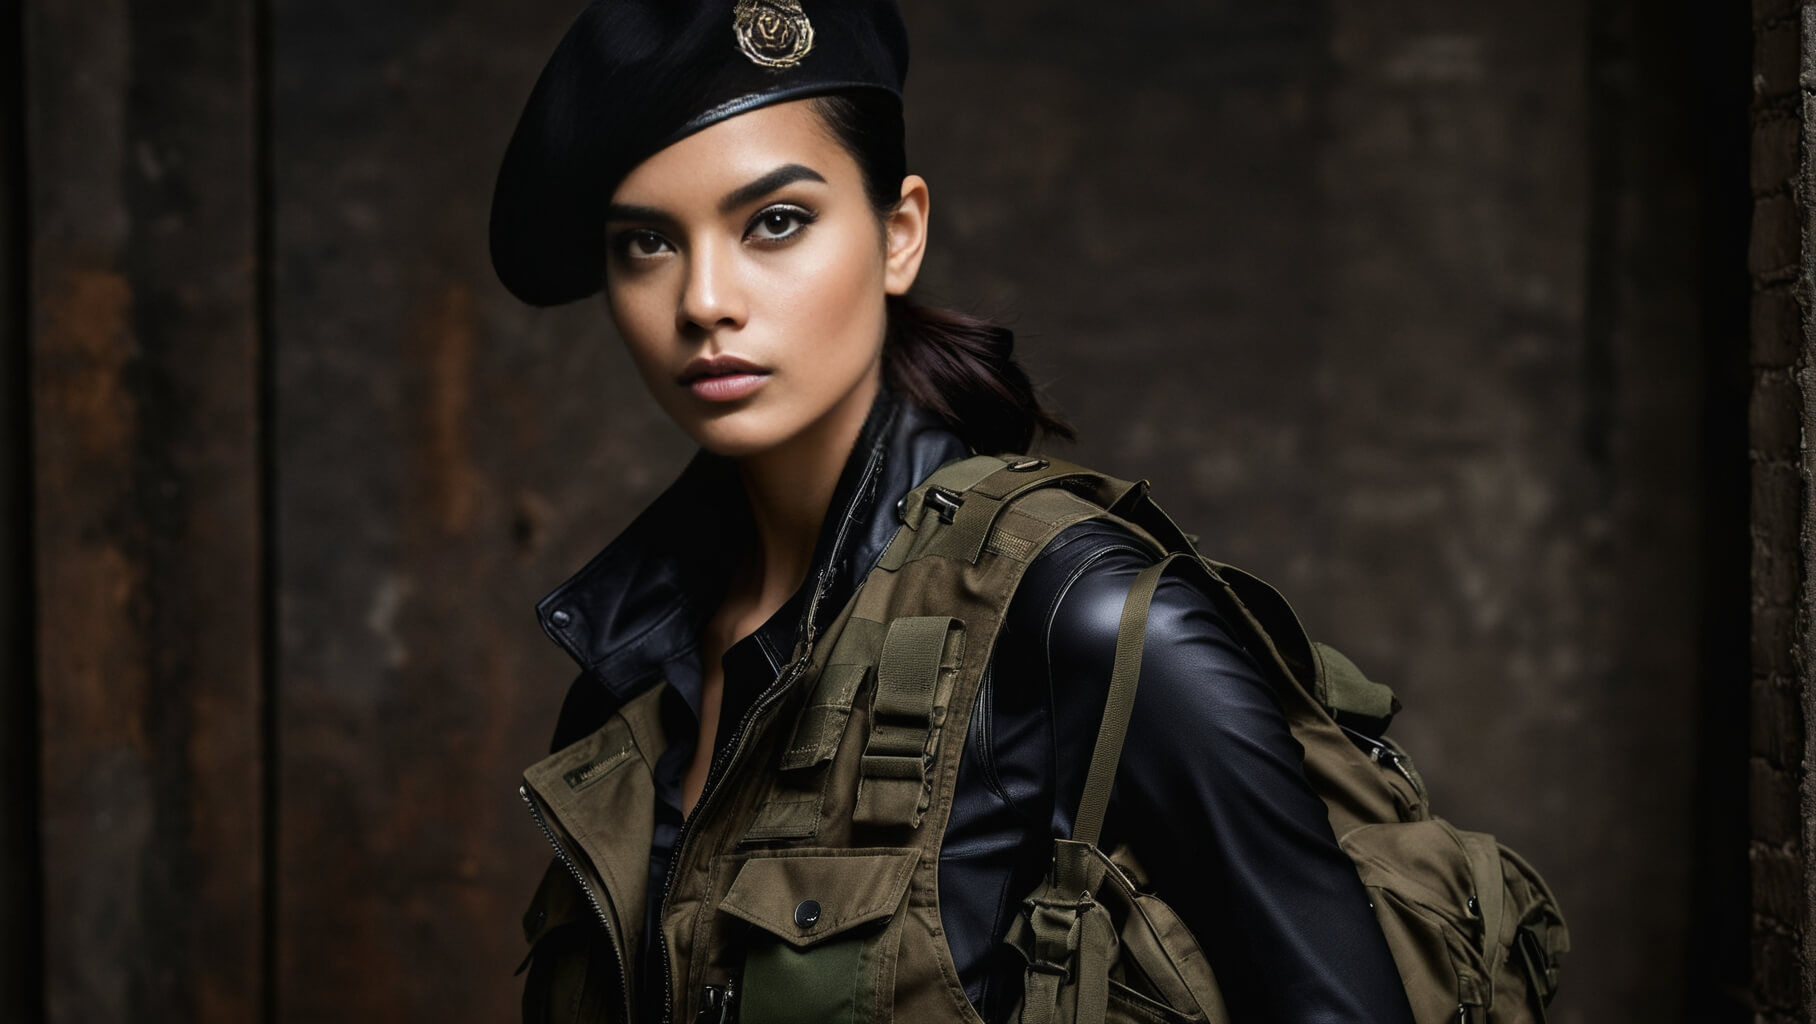 Camouflage vest with tailored fit for Battle Chic ensemble